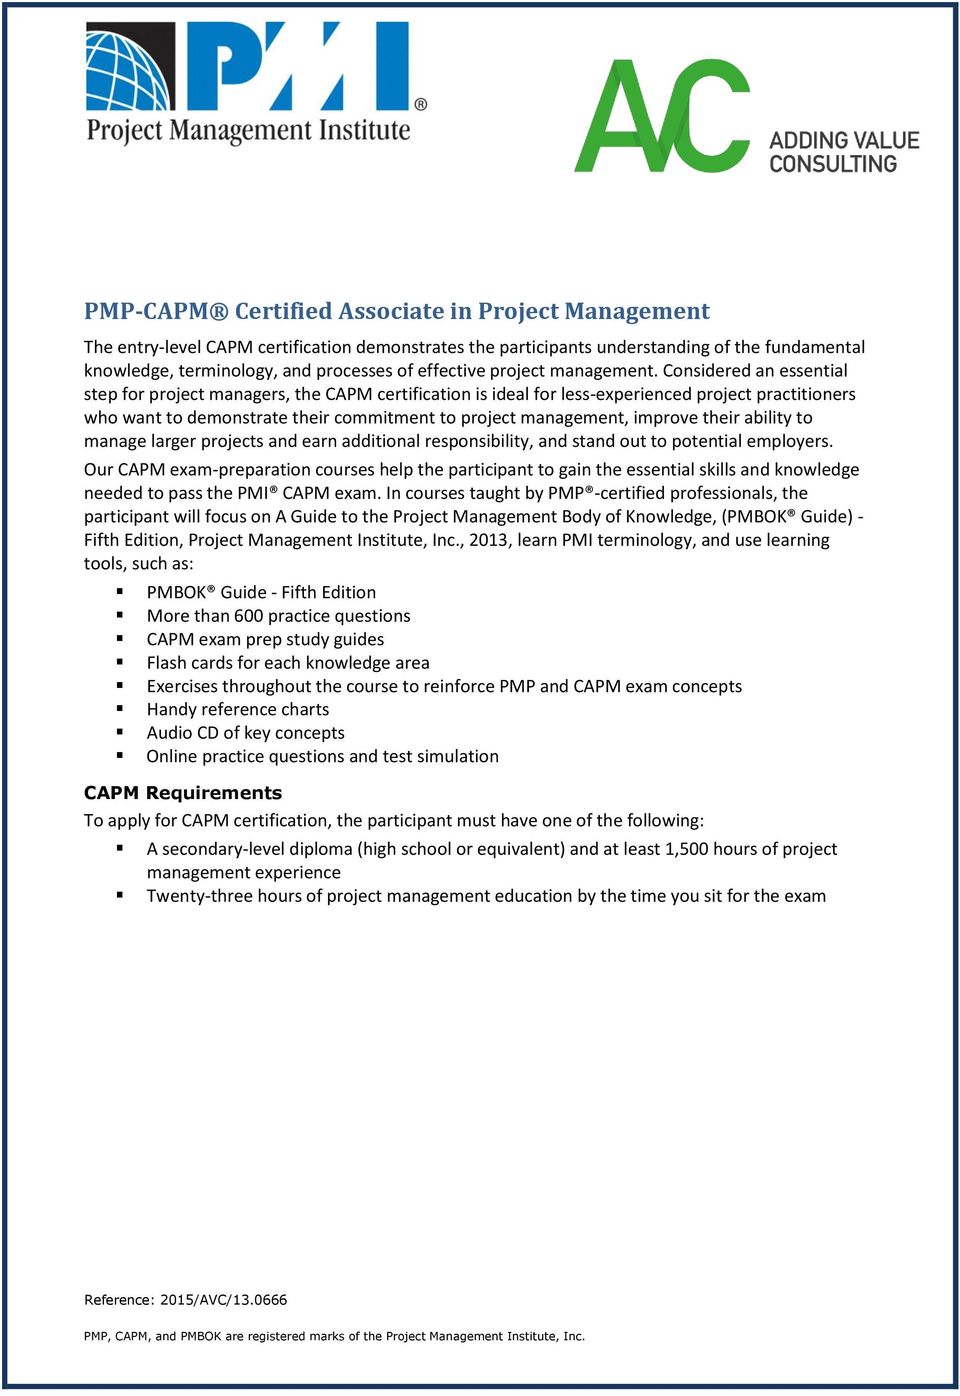 Considered an essential step for project managers, the CAPM certification is ideal for less-experienced project practitioners who want to demonstrate their commitment to project management, improve